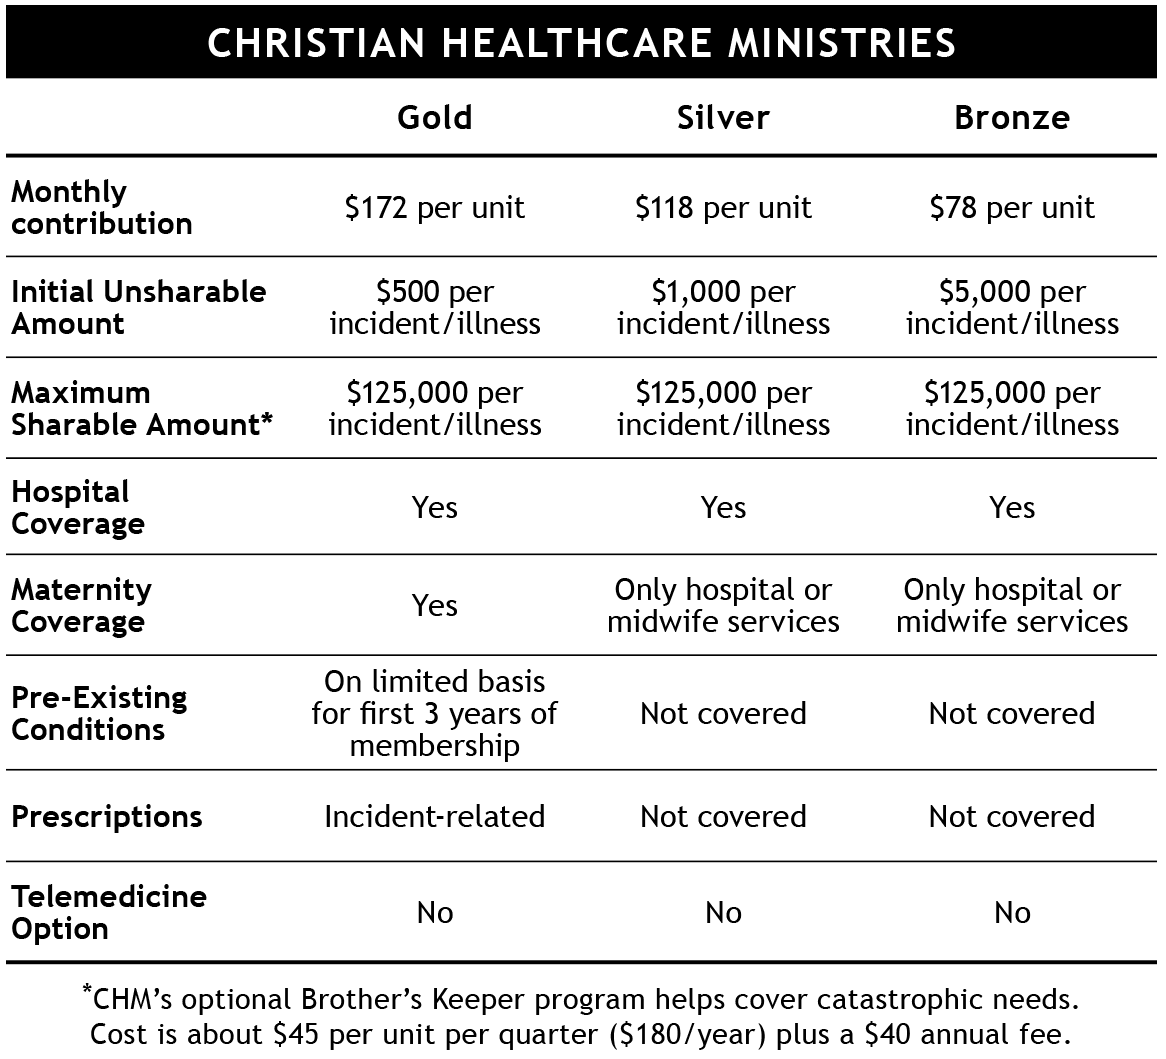 Health Care Sharing Ministries: A Christian Alternative to Health Insurance